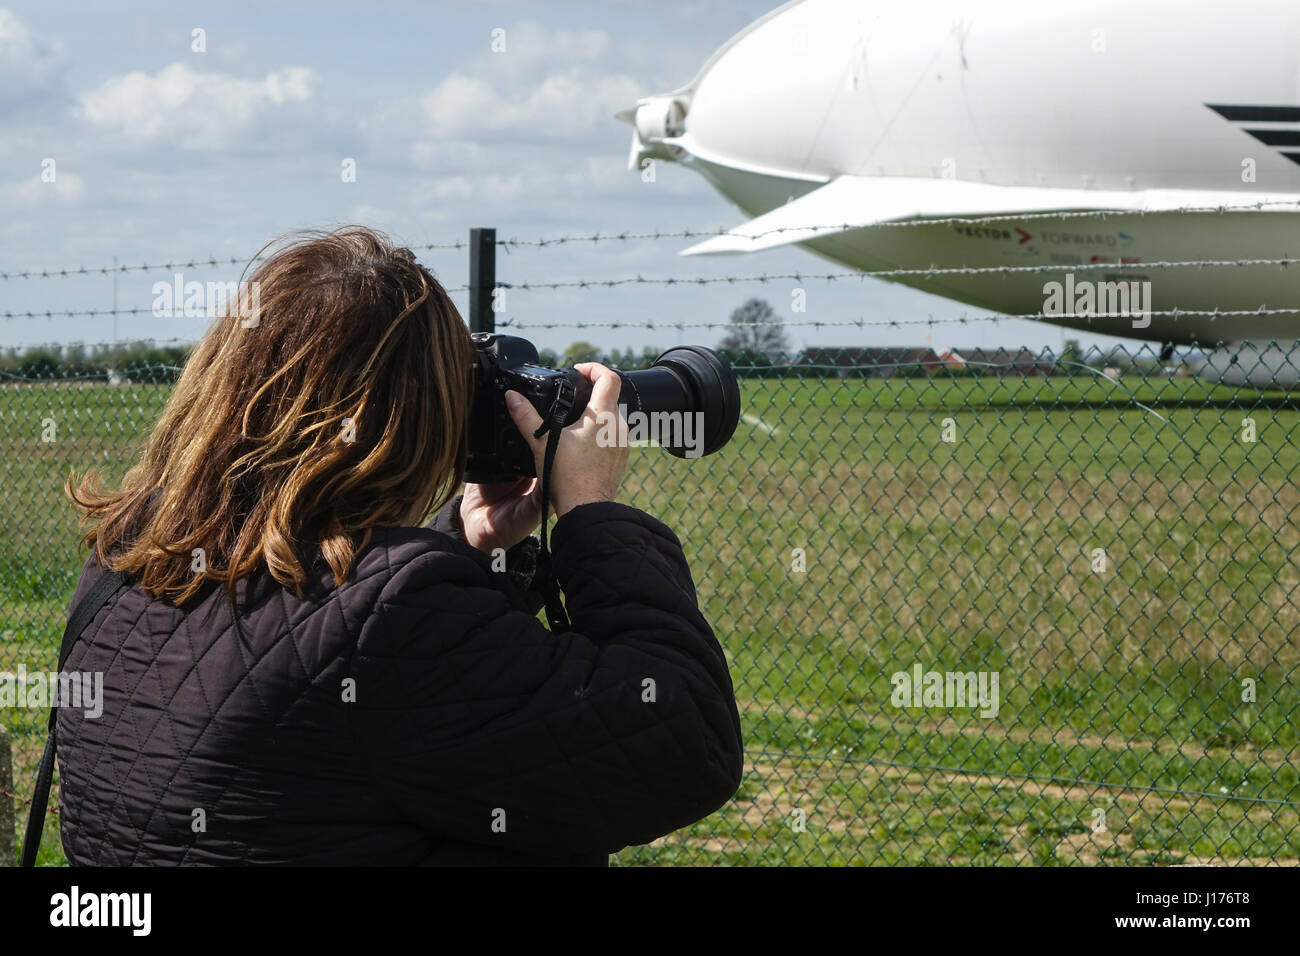 Cardington, Bedfordshire, UK. 18th Apr, 2017. The Hybrid Air Vehicles Airlander 10 is moored to the new Mobile Mooring Mast (MMM), a female photographer shoots through the mesh fence at the airfield. An Auxiliary Landing System (ALS) has been added which allows the aircraft to land safely at a greater range of landing angles. Photo Credit: Mick Flynn/Alamy Live News Stock Photo